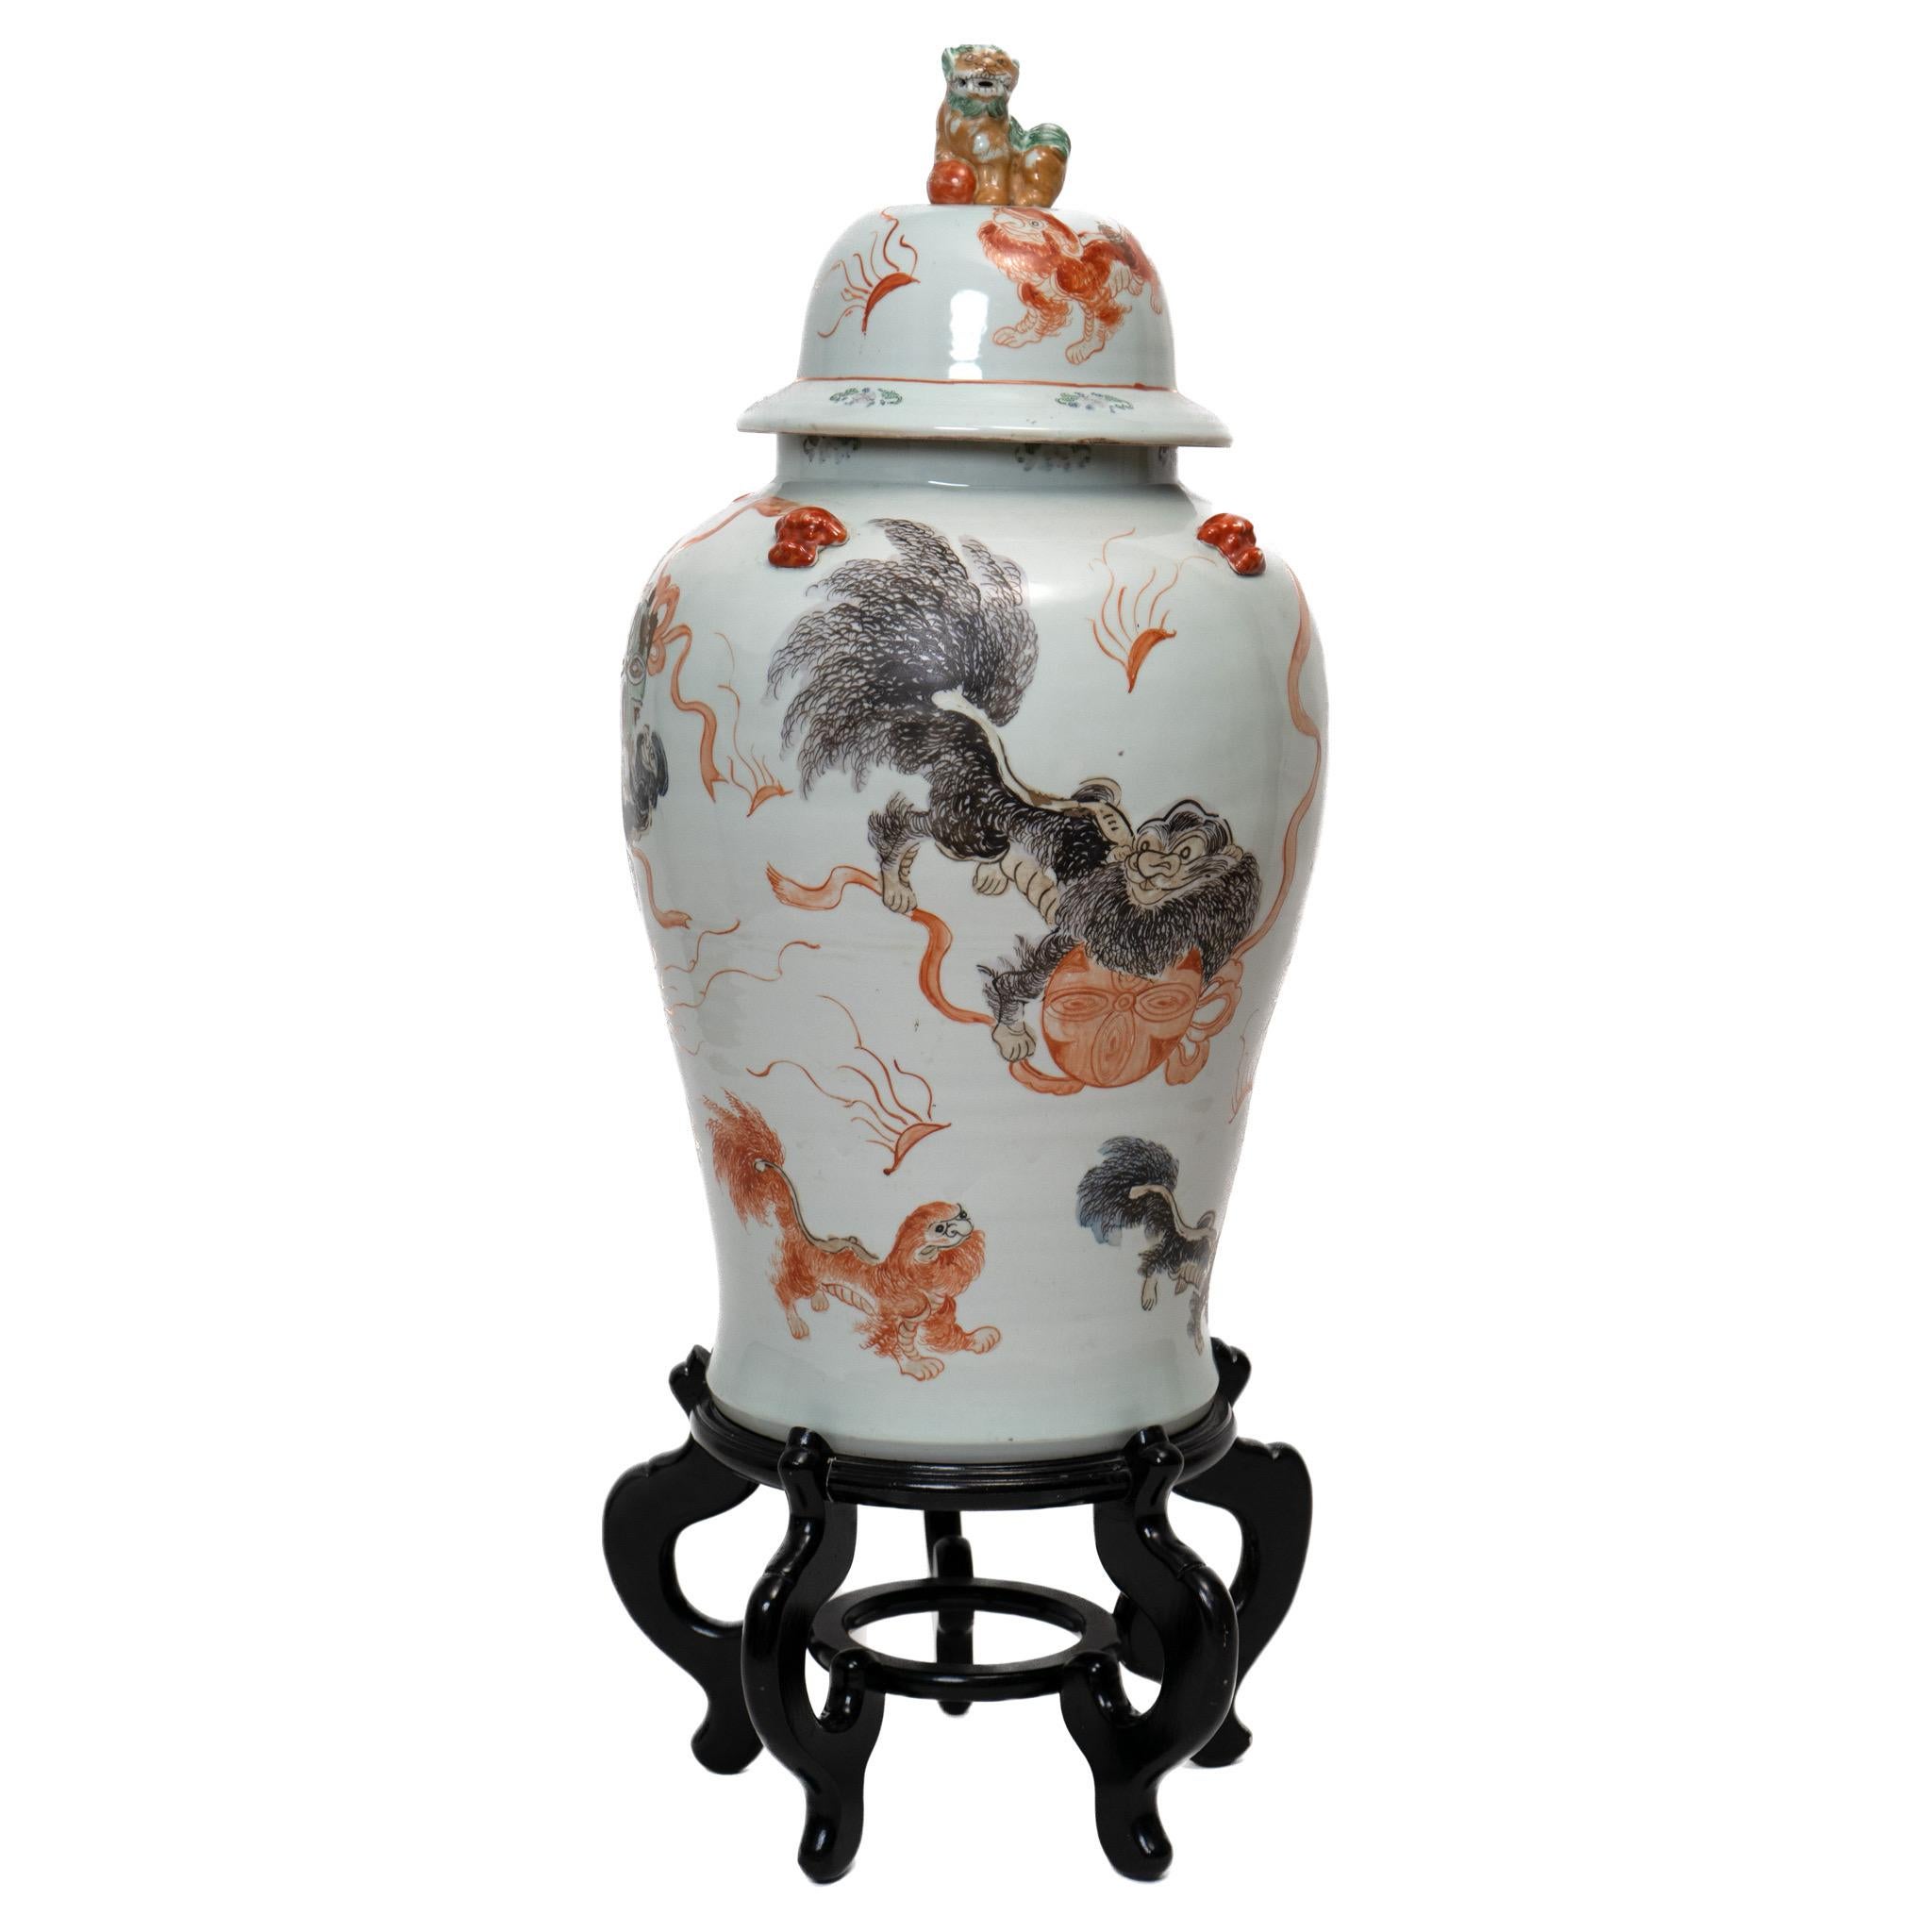 Details of Chinese guardian lions on enamel jars with lids atop pedestals.

18 x 33 in.

$2,450 for the pair